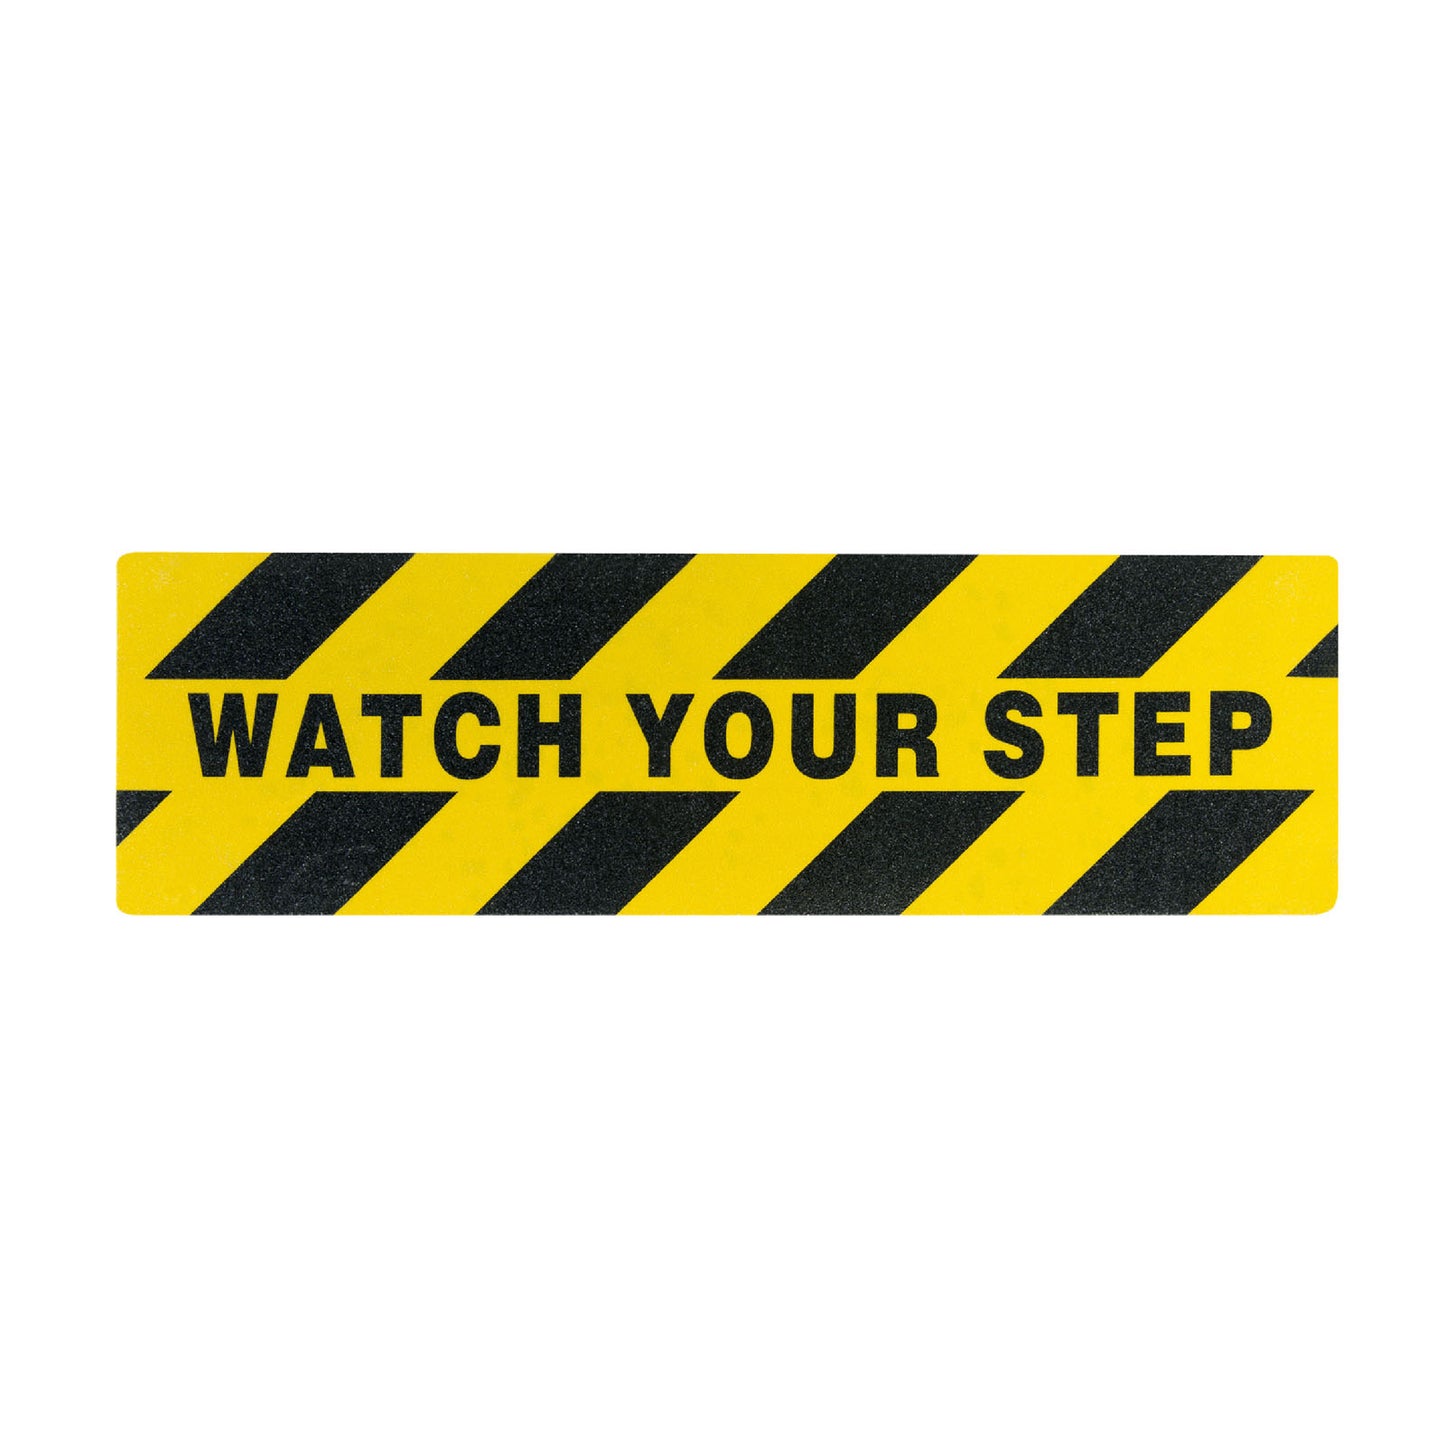 500MM x 150MM Yellow/Black "Watch Your Step" Commercial High Grit Anti-Slip XL Step